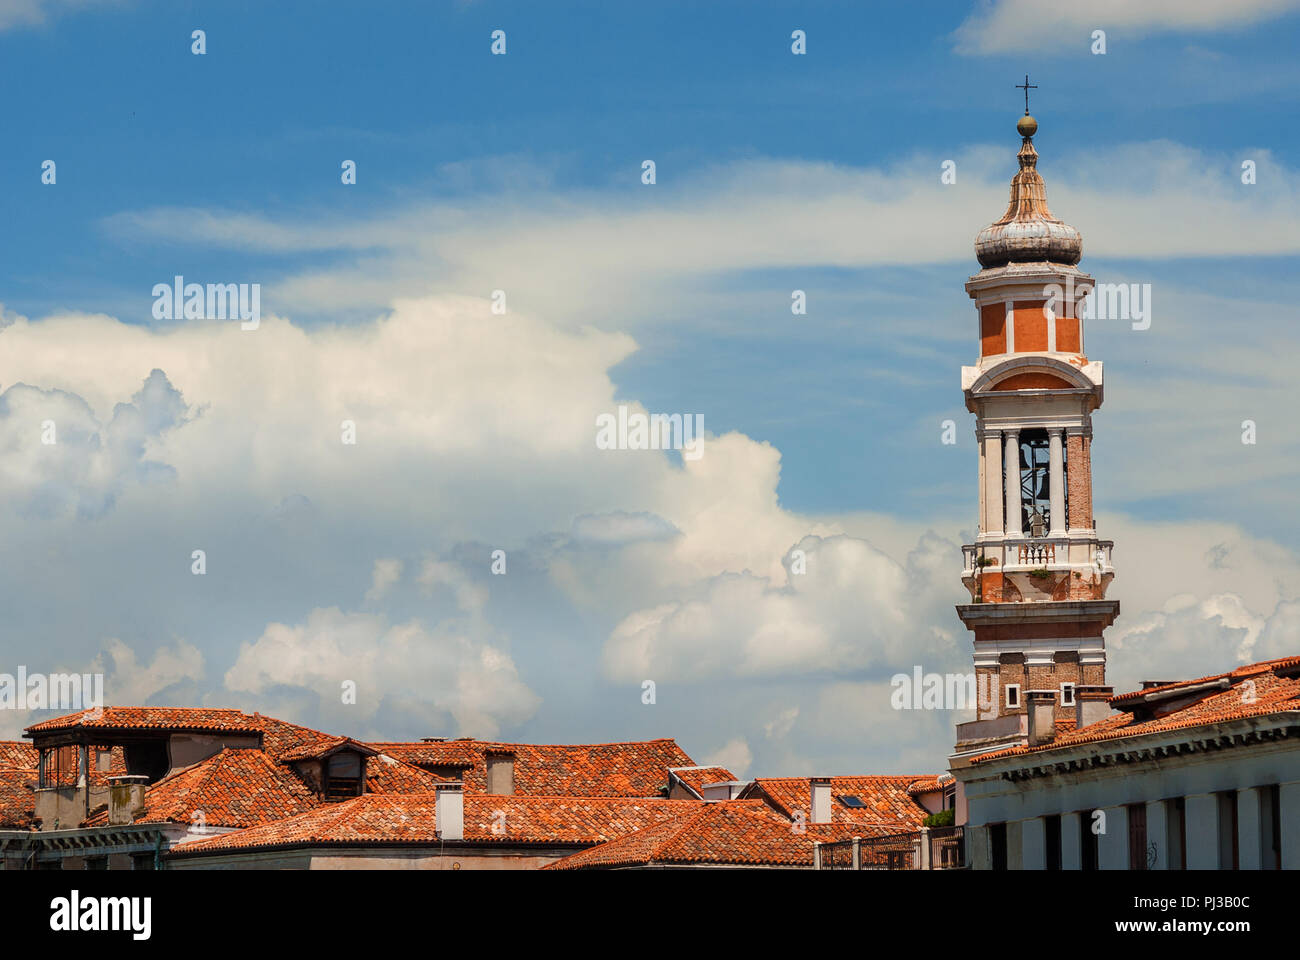 Church of the Holy Apostles of Christ baroque bell tower, built between 17th and 18th century, rise above Venice historic center old buildings among c Stock Photo